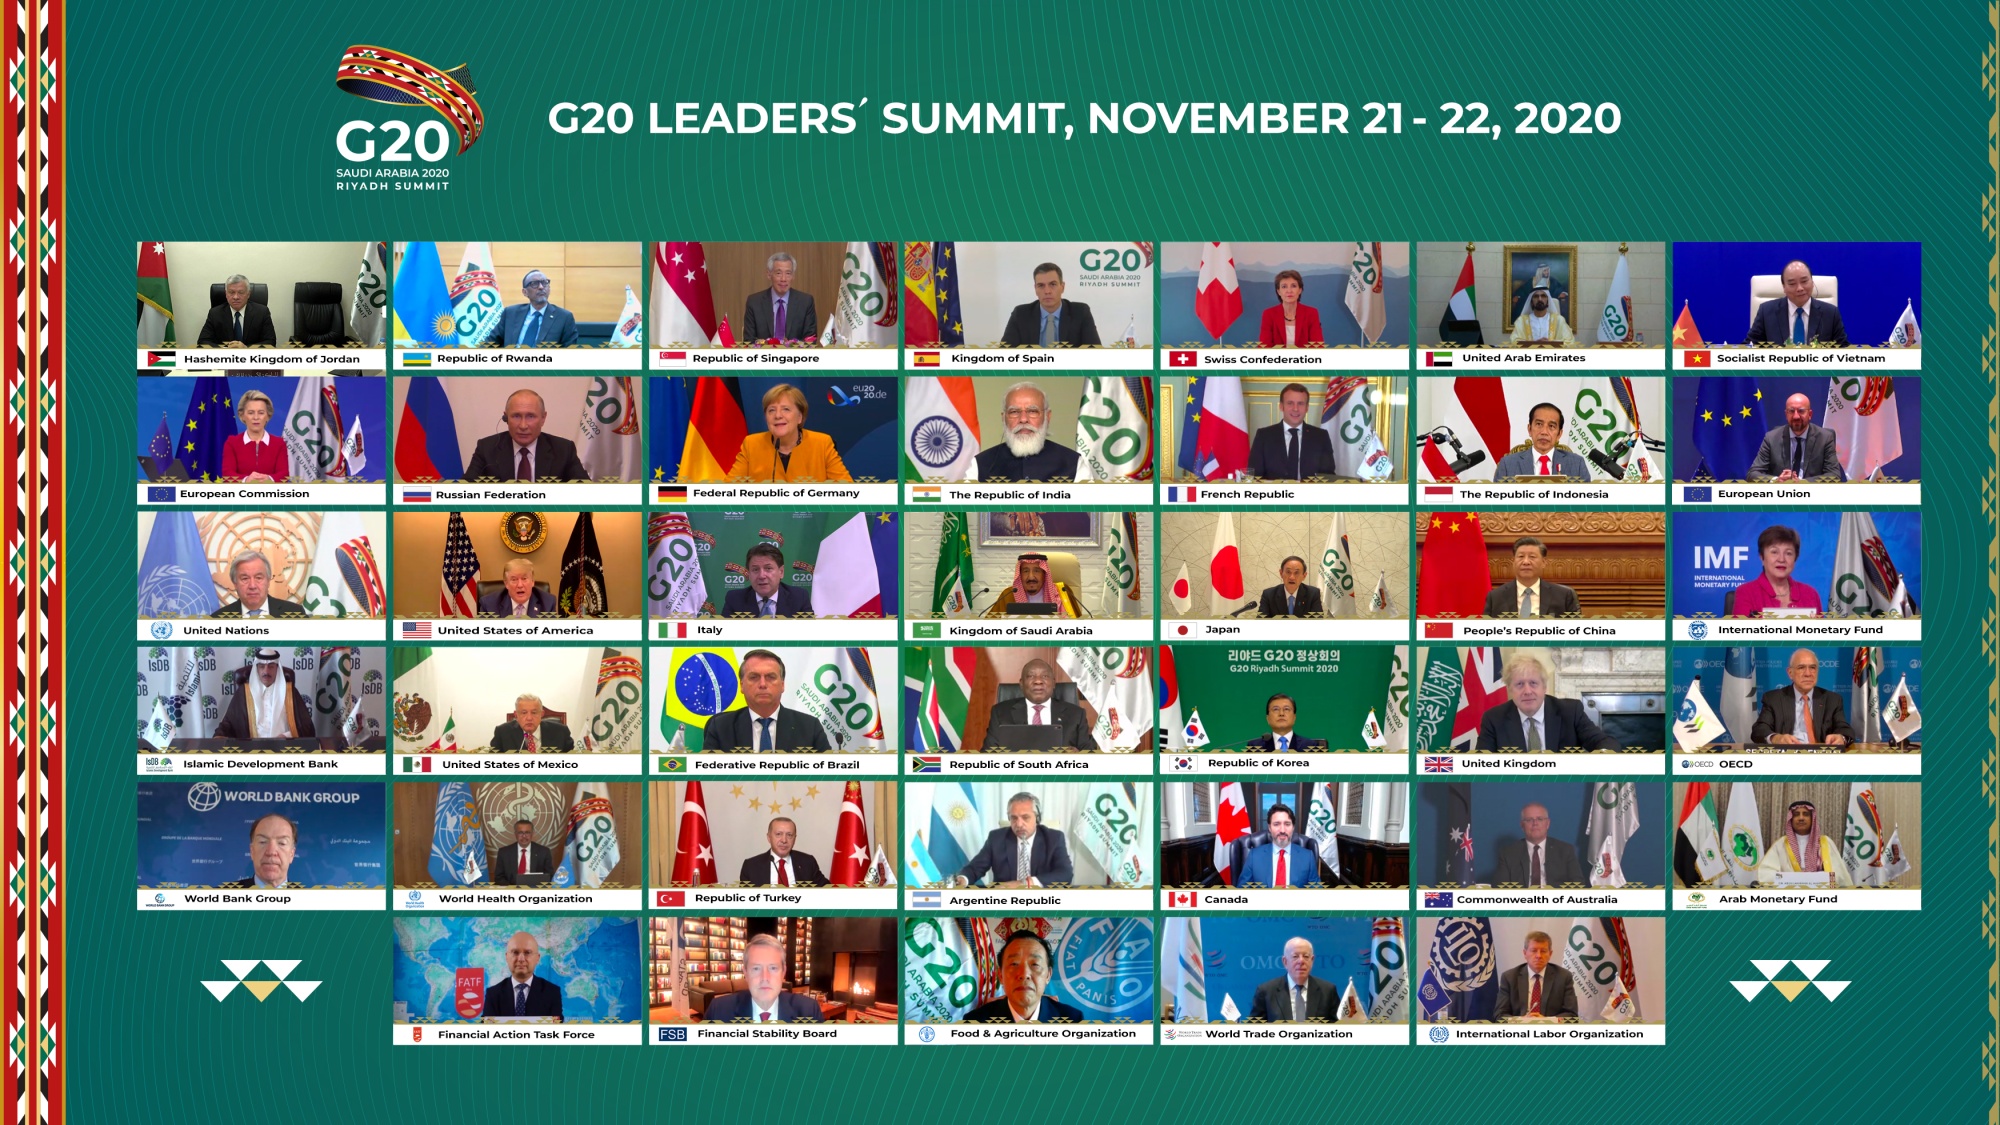 A family photo from the opening session of the G20 Riyadh Summit